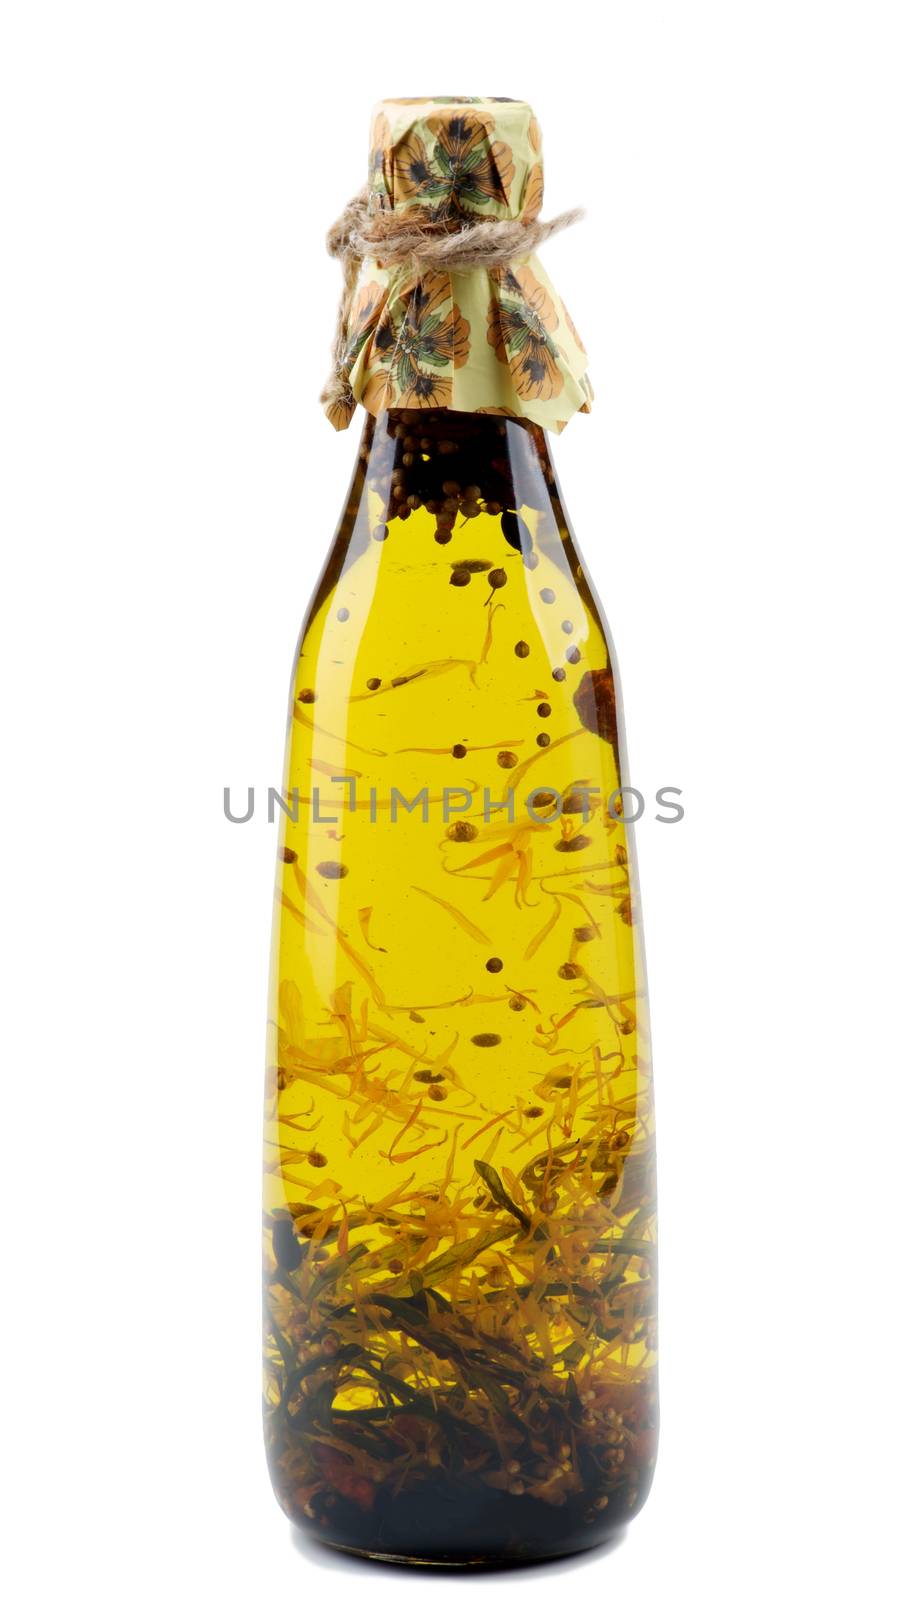 Olive Oil with Rosemary, Saffron and Coriander by zhekos